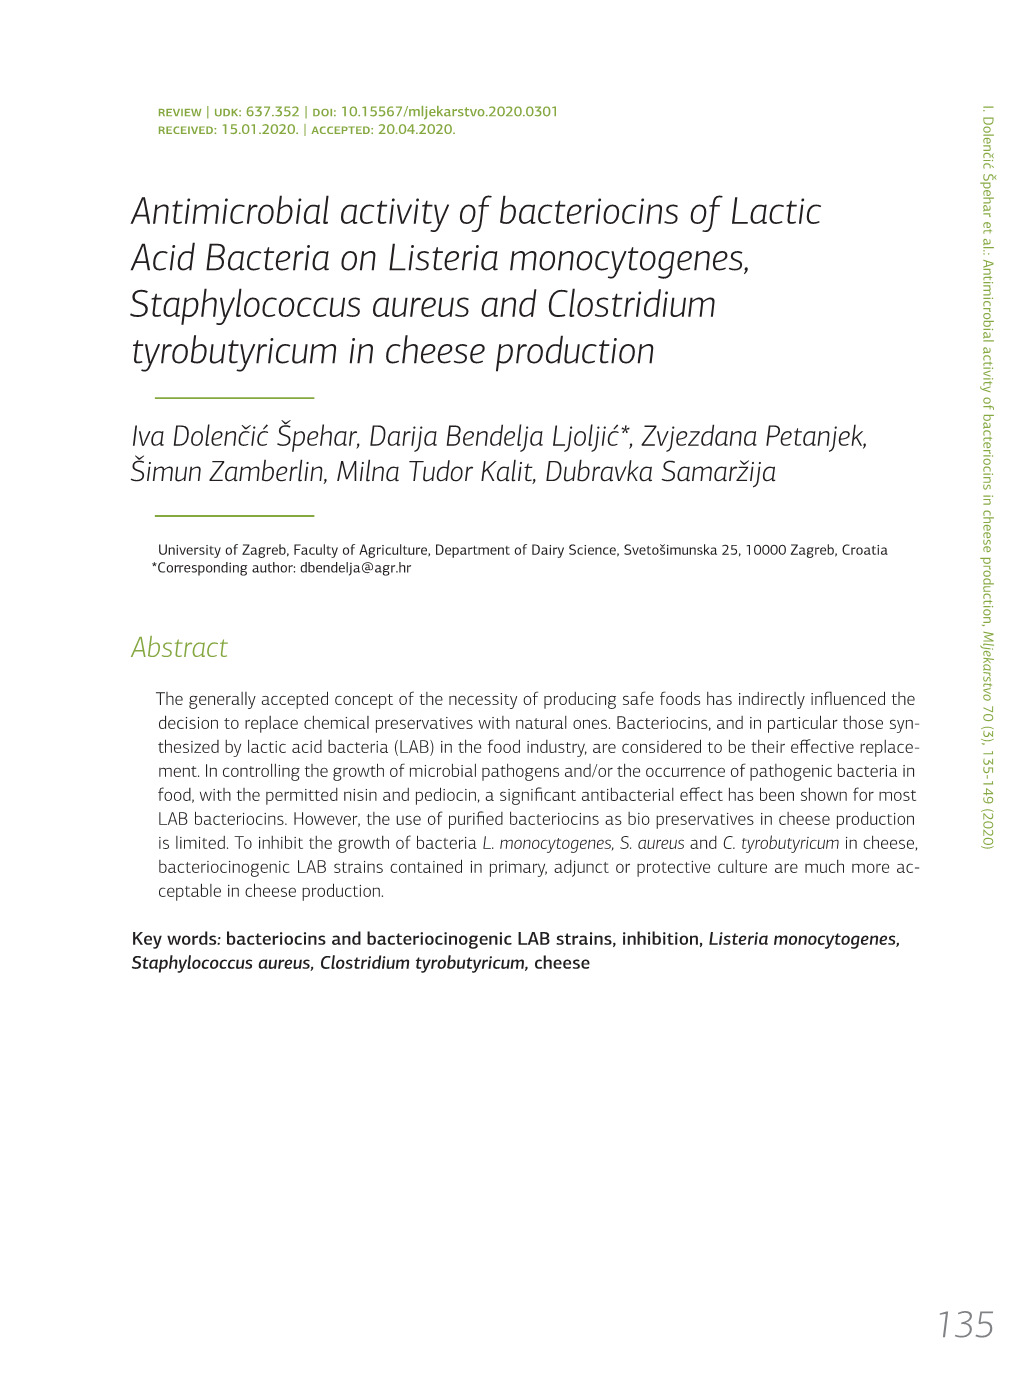 Antimicrobial Activity of Bacteriocins of Lactic Acid Bacteria on Listeria Monocytogenes, Staphylococcus Aureus and Clostridium Tyrobutyricum in Cheese Production